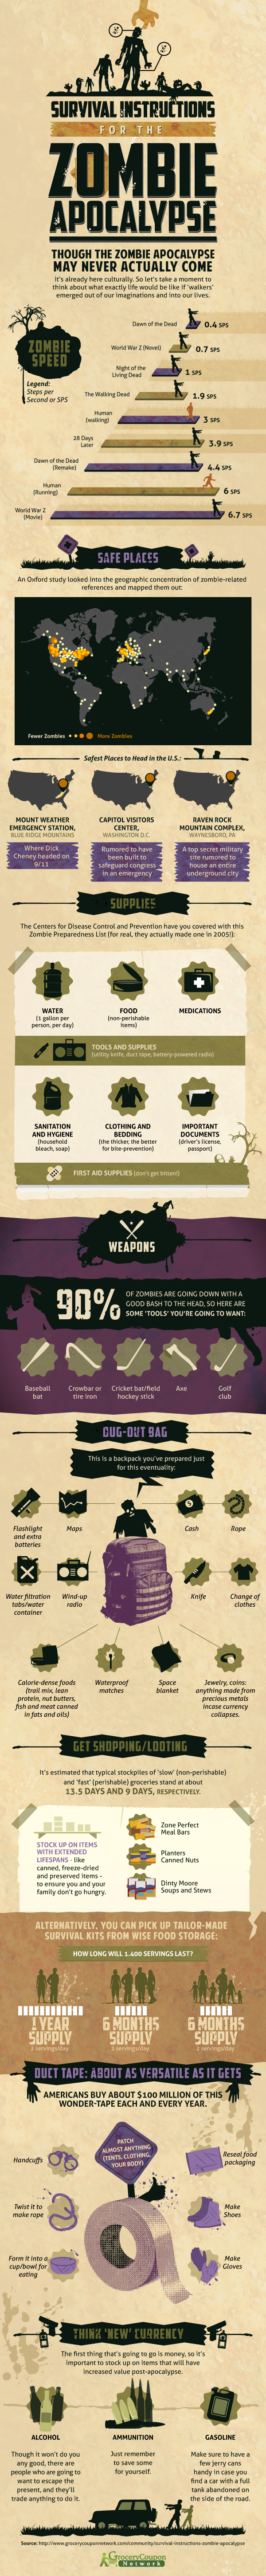 Survival Guide for the Zombie Apocalypse [Infographic]